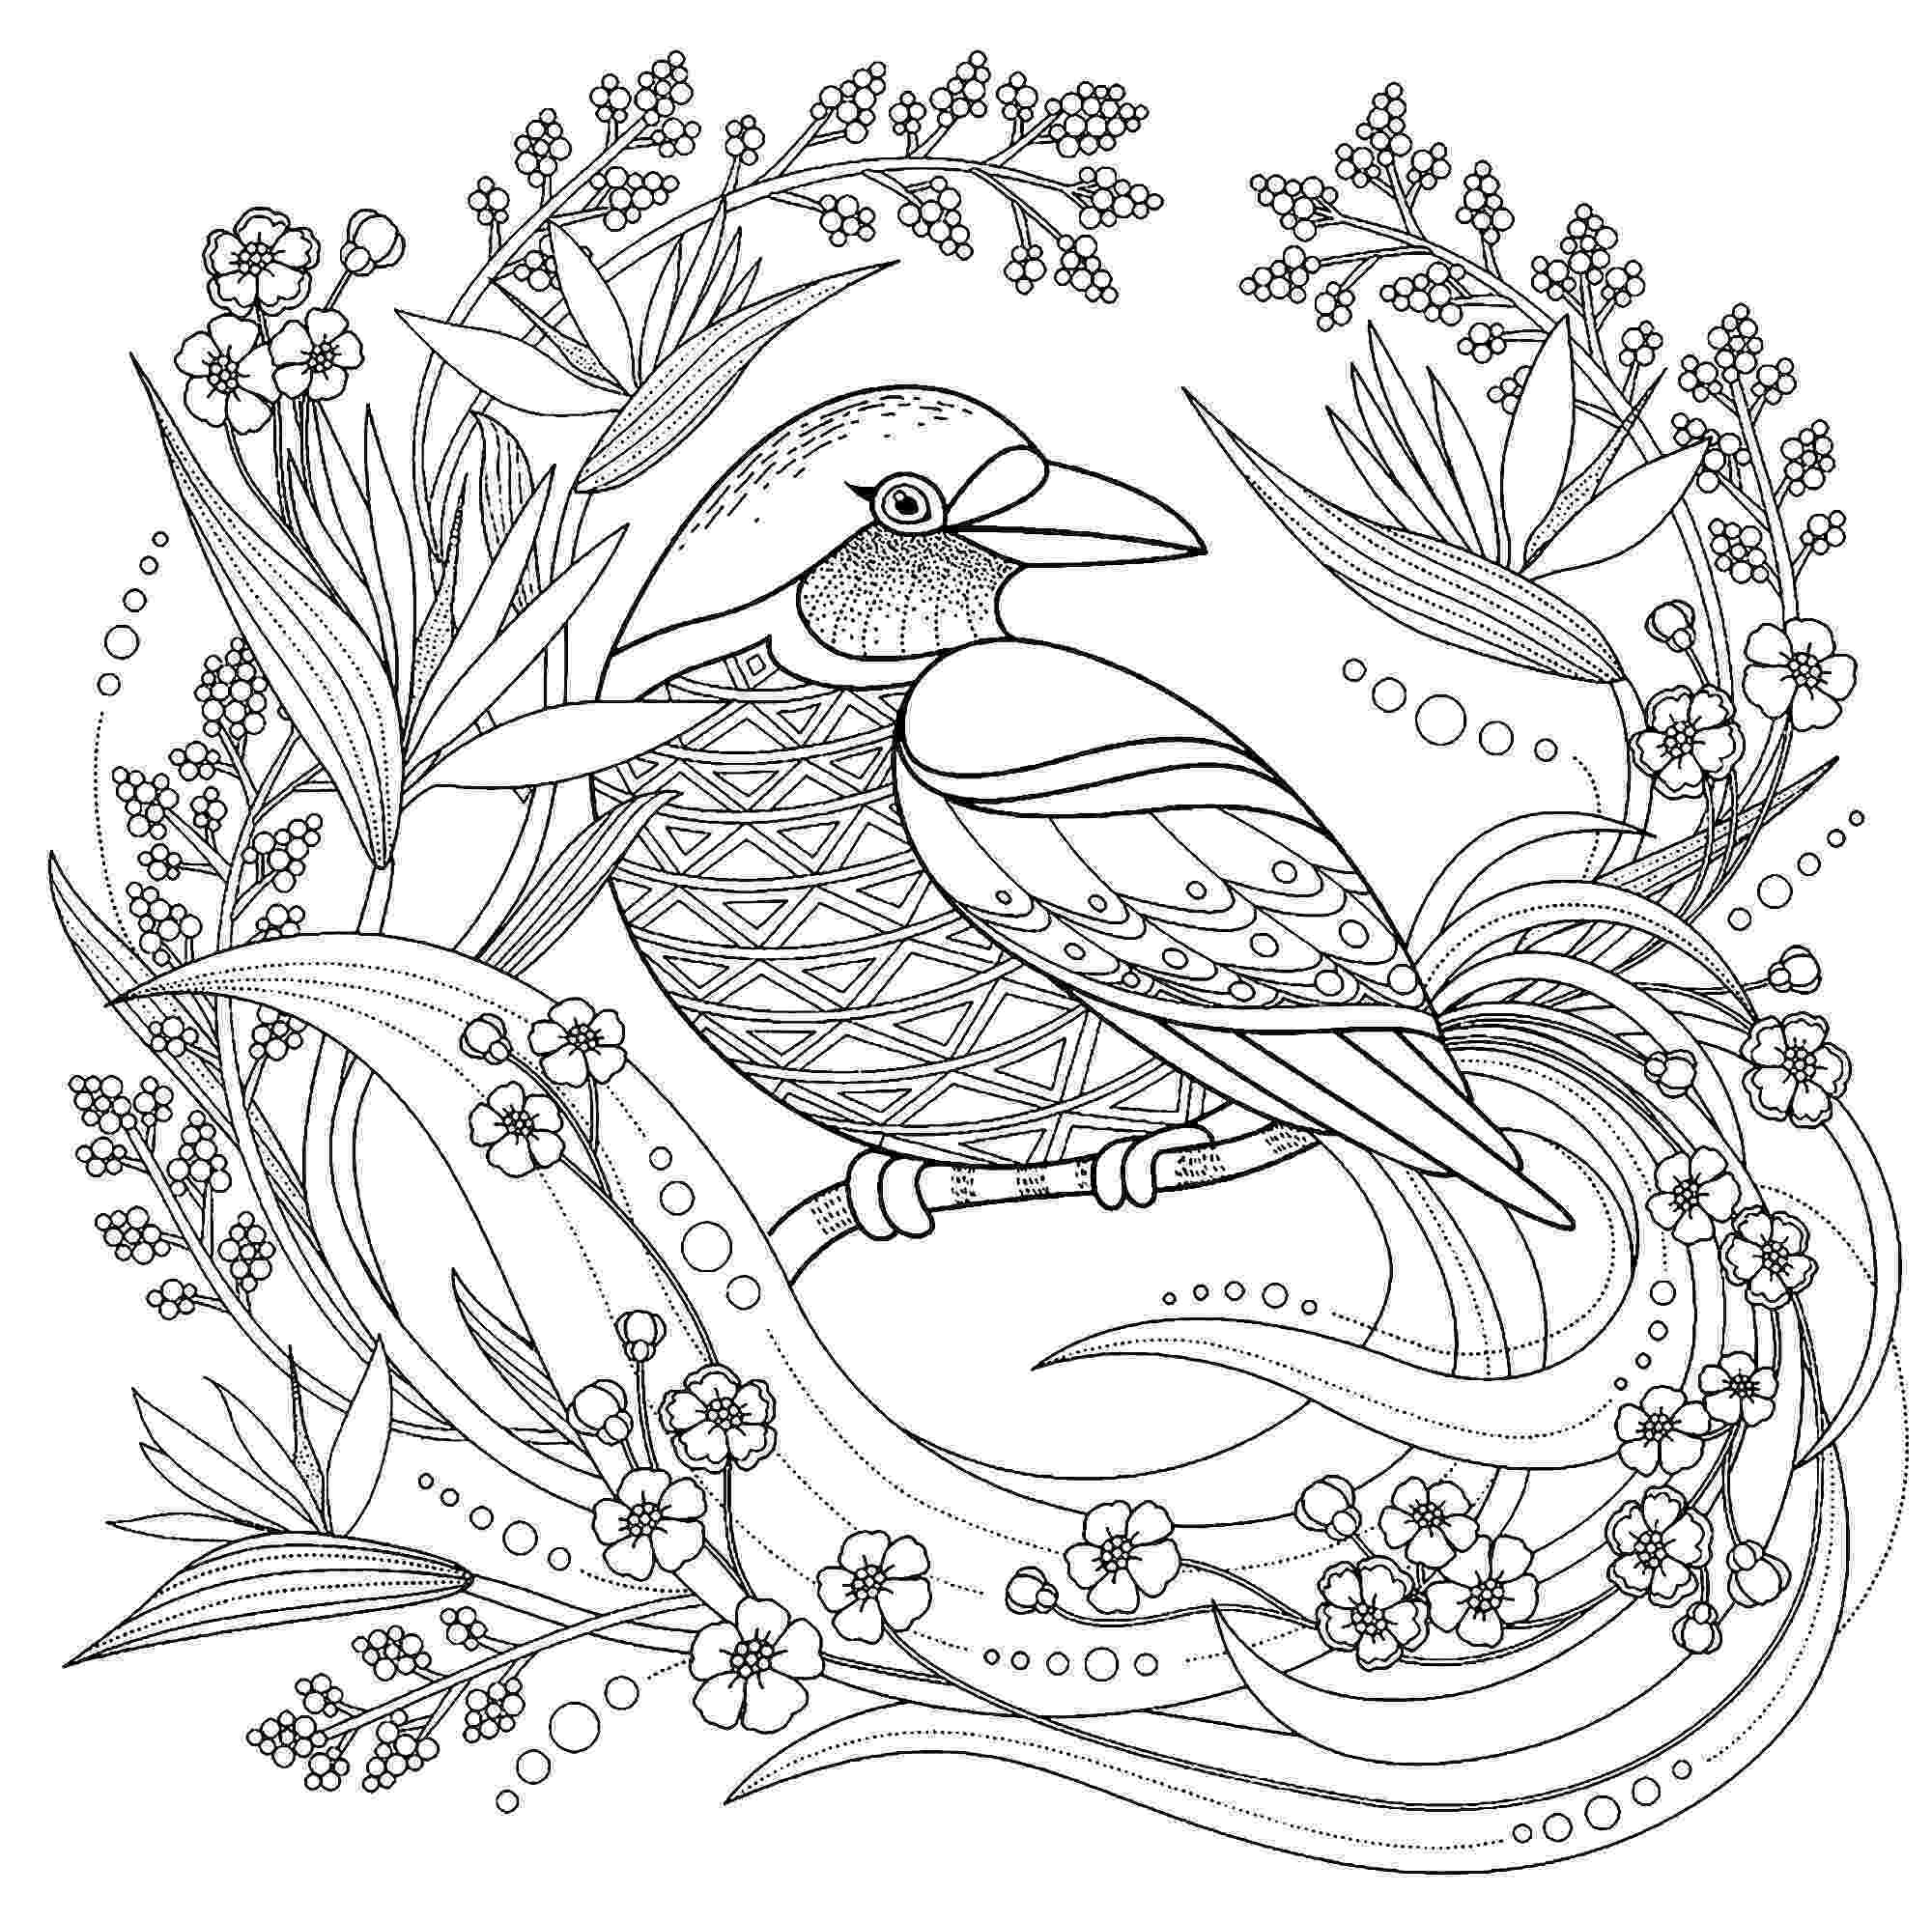 bird coloring sheet bird coloring page others at this site bird coloring bird coloring sheet 